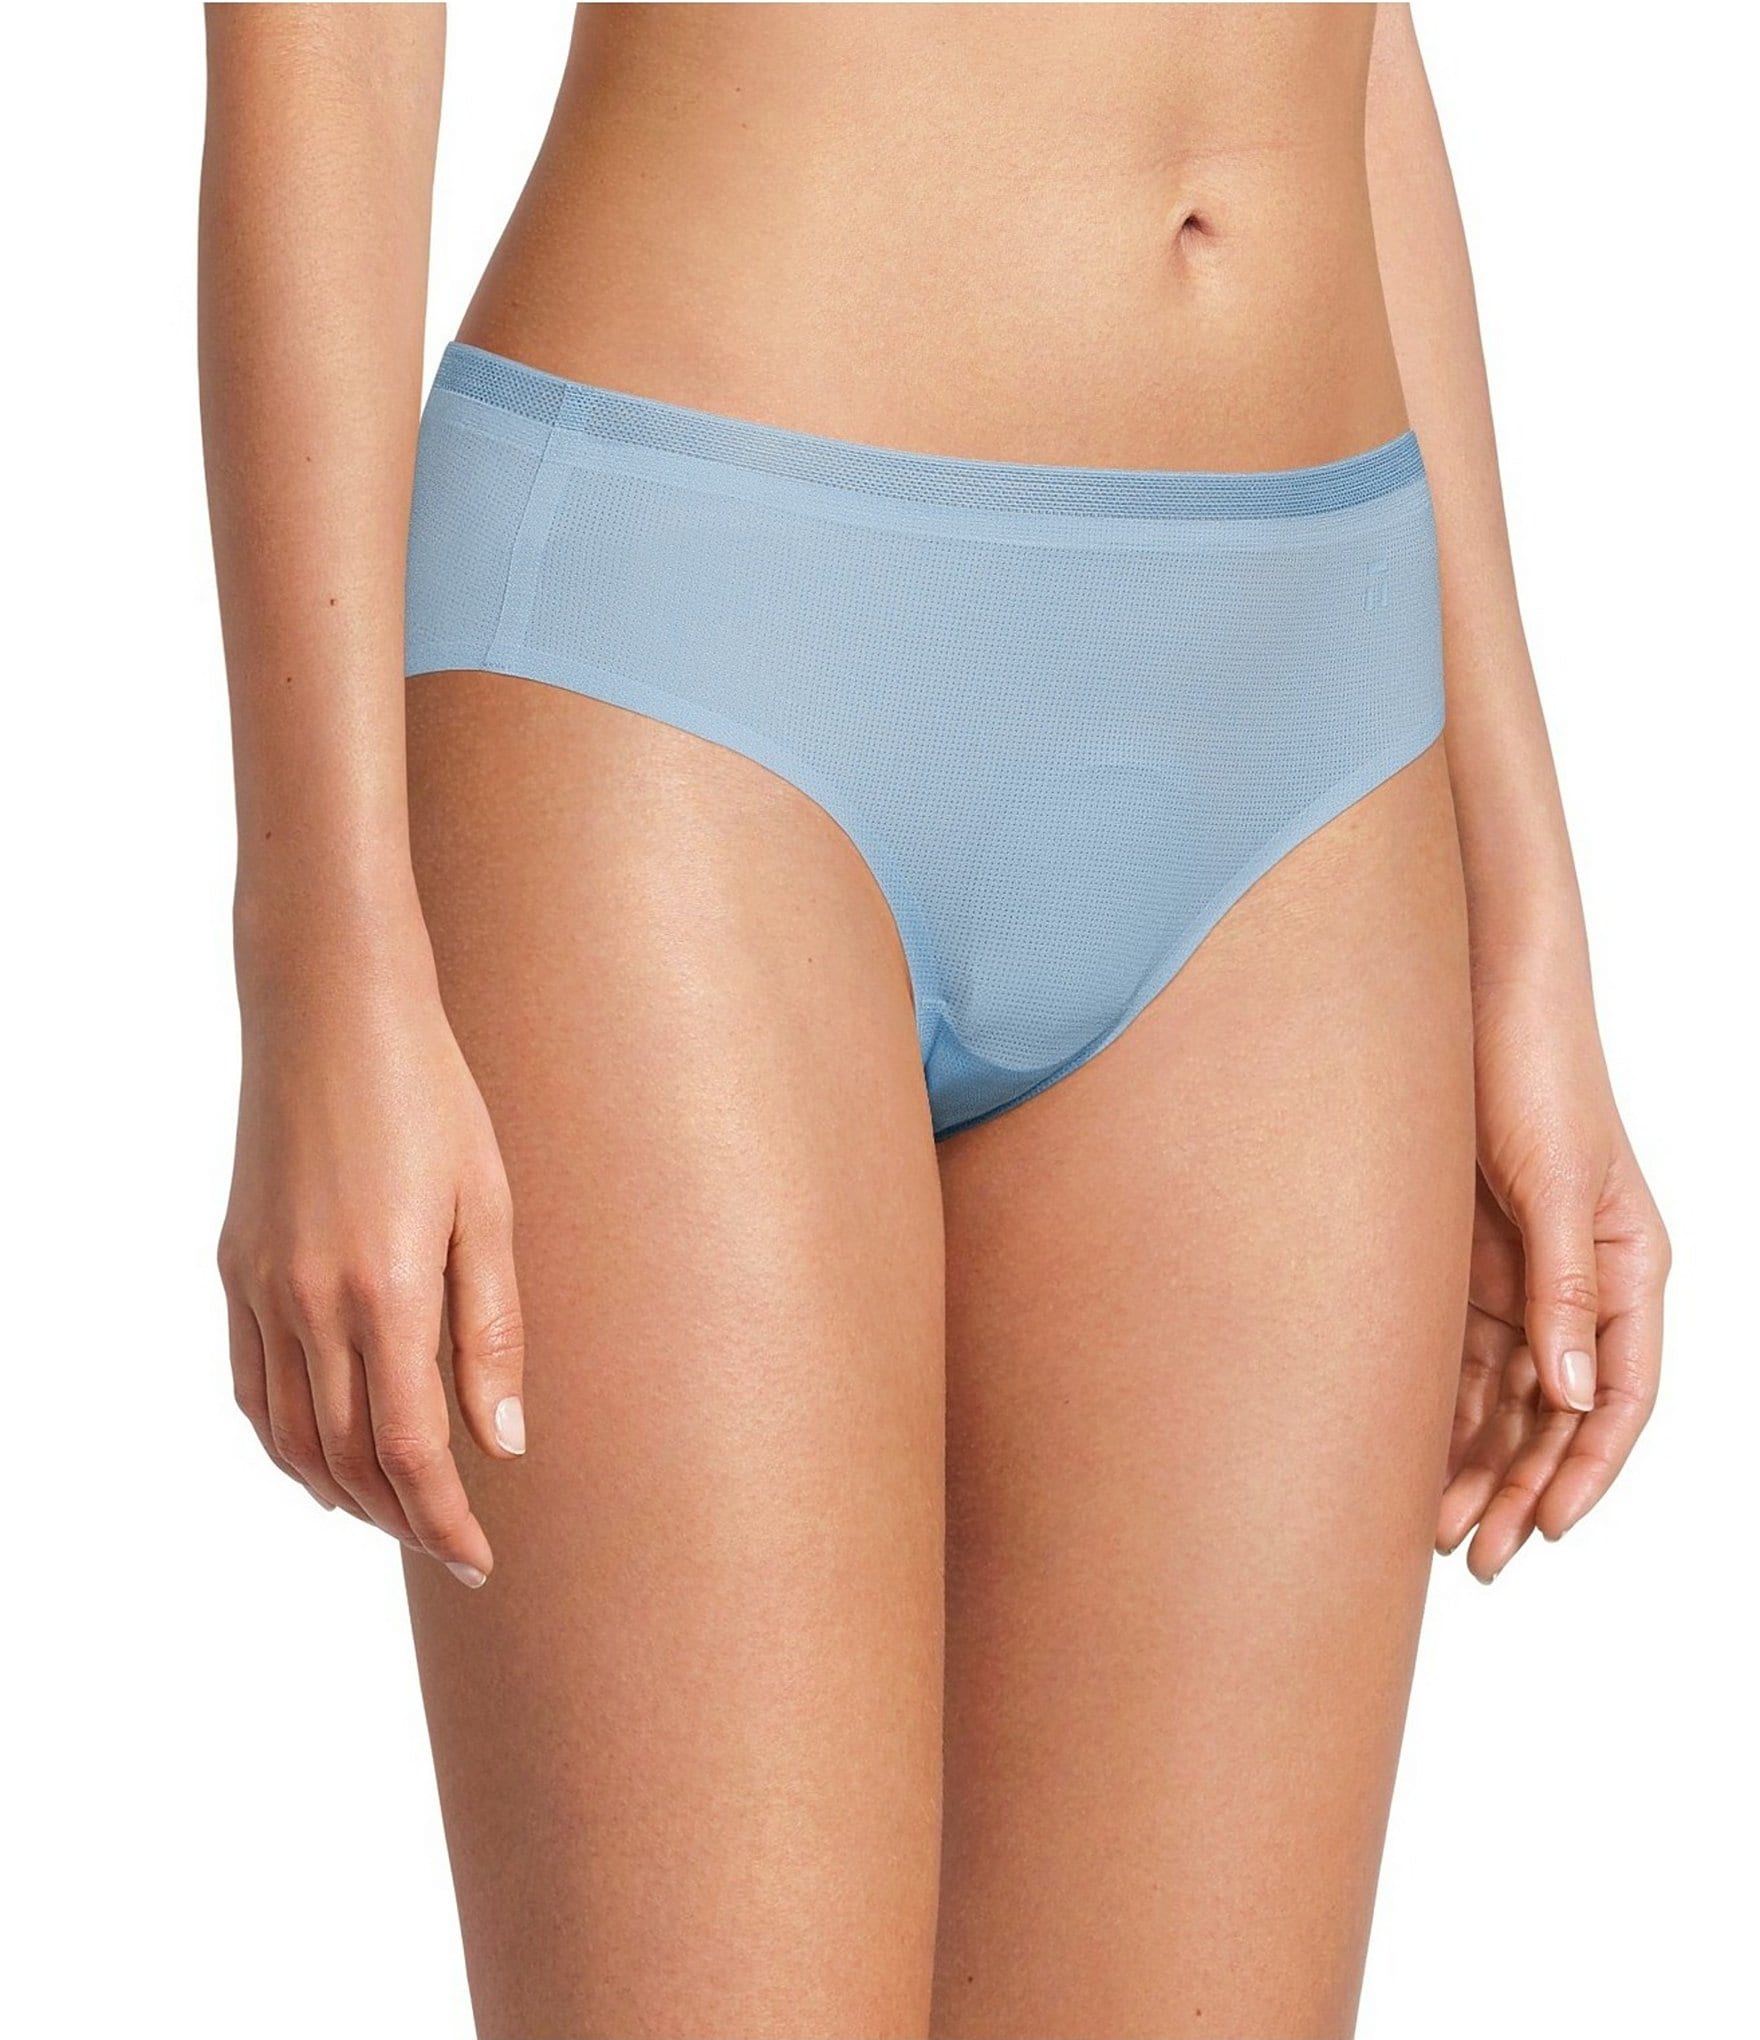 Tommy John introduces 'no panty line' underwear for women